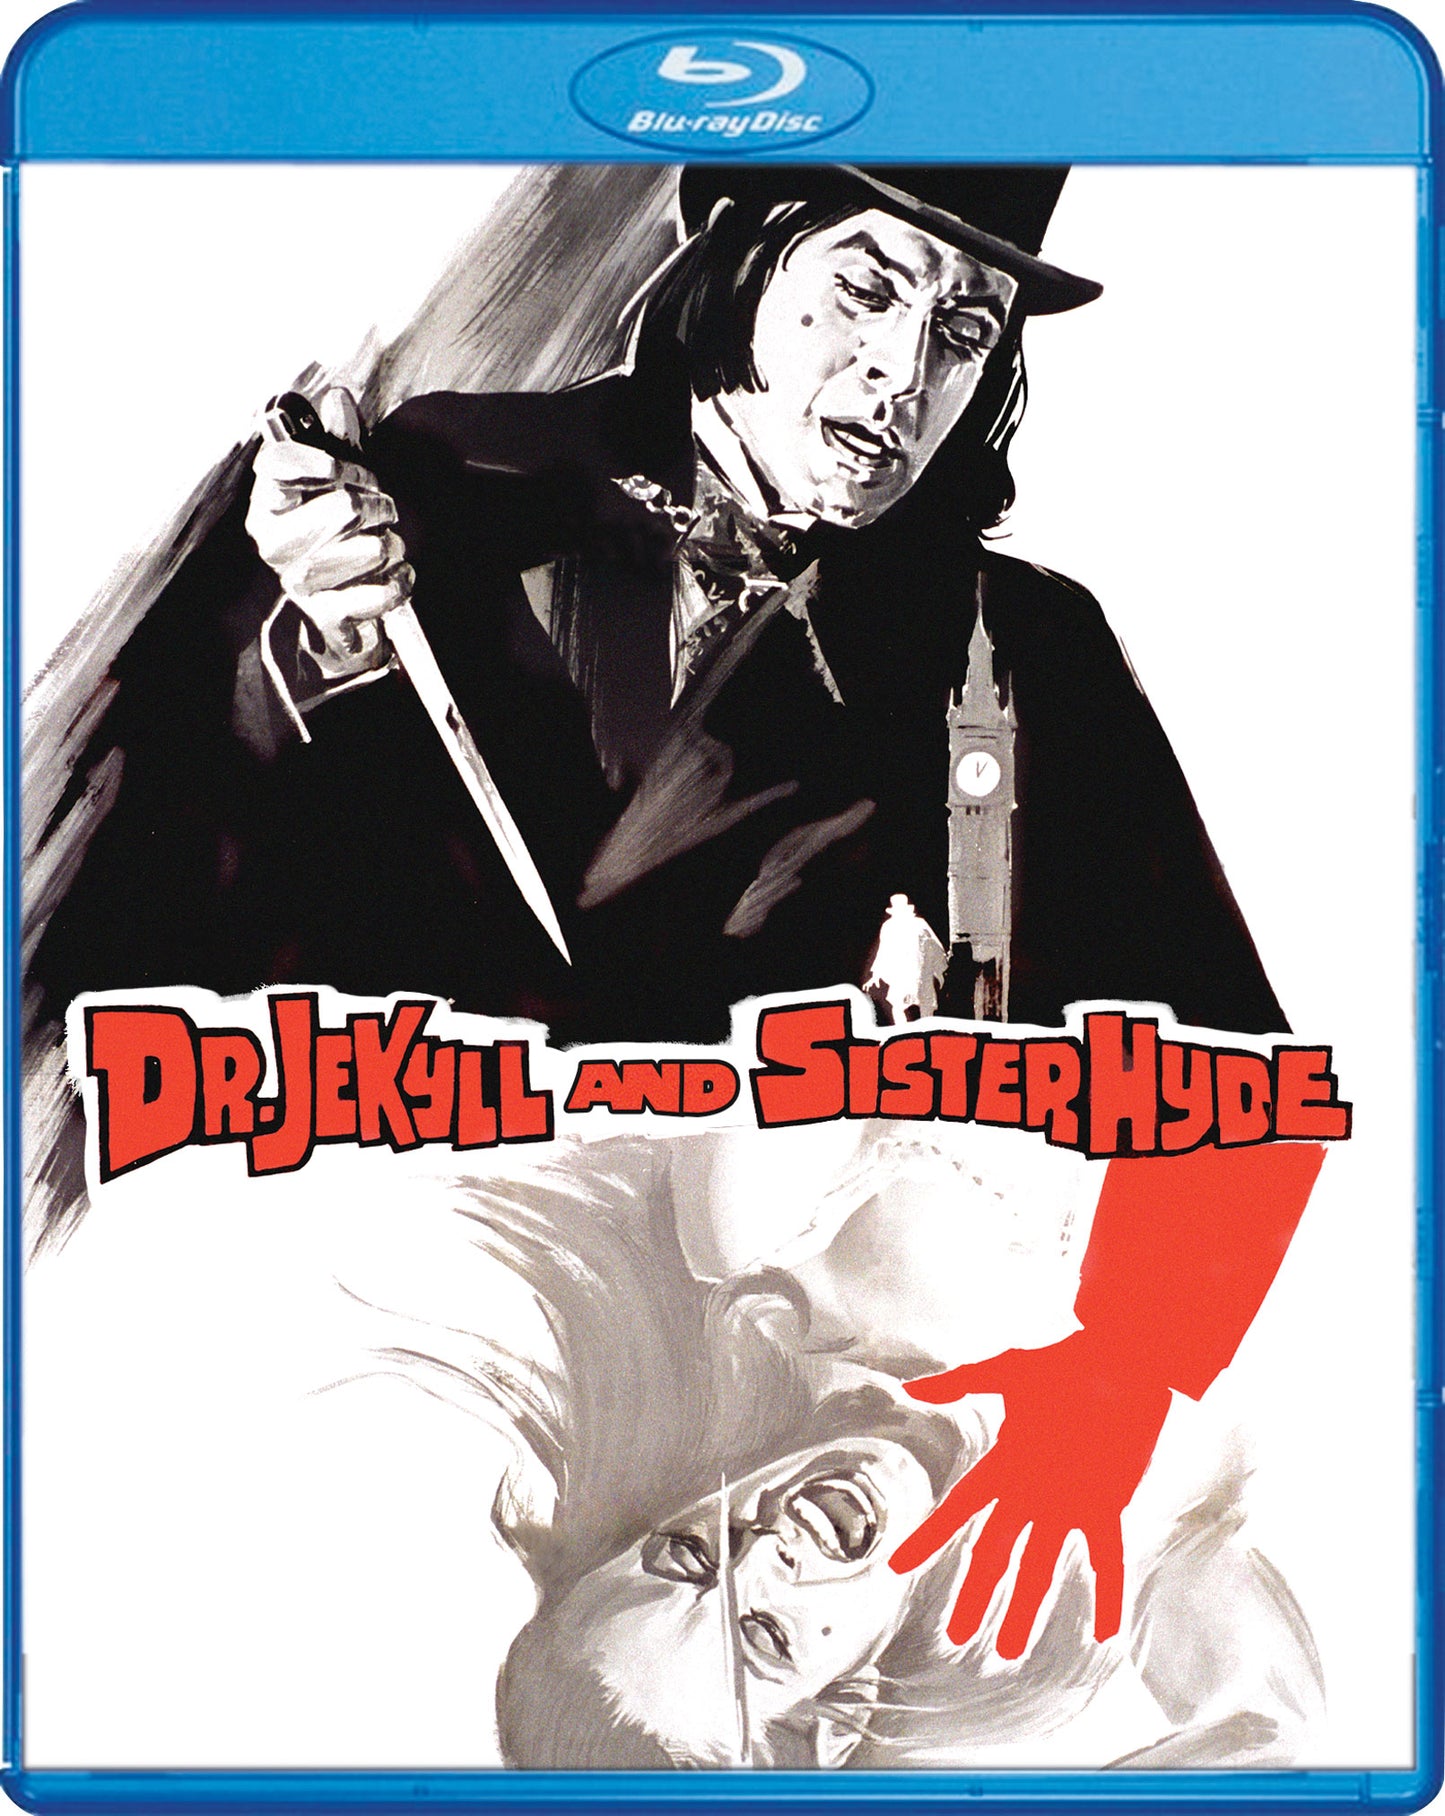 Dr. Jekyll and Sister Hyde [Blu-ray] cover art